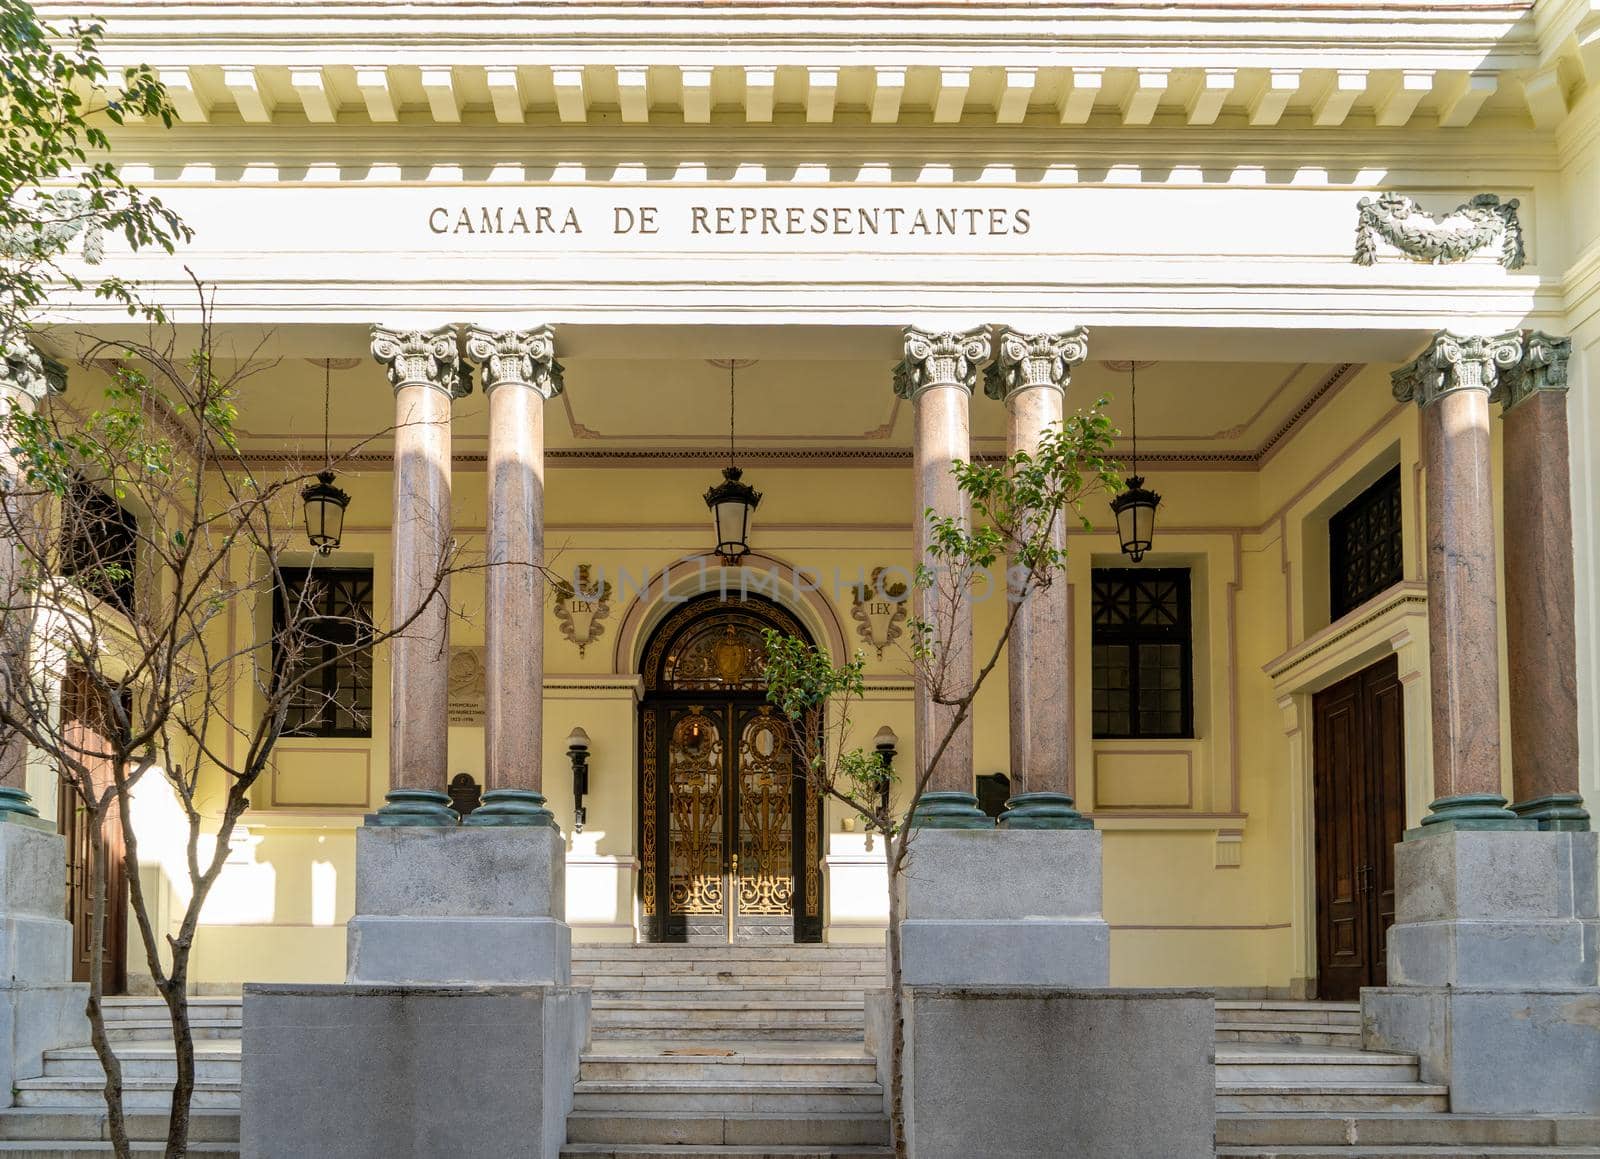 Havana Cuba. November 25, 2020: House of Representatives in Old Havana, current local government office